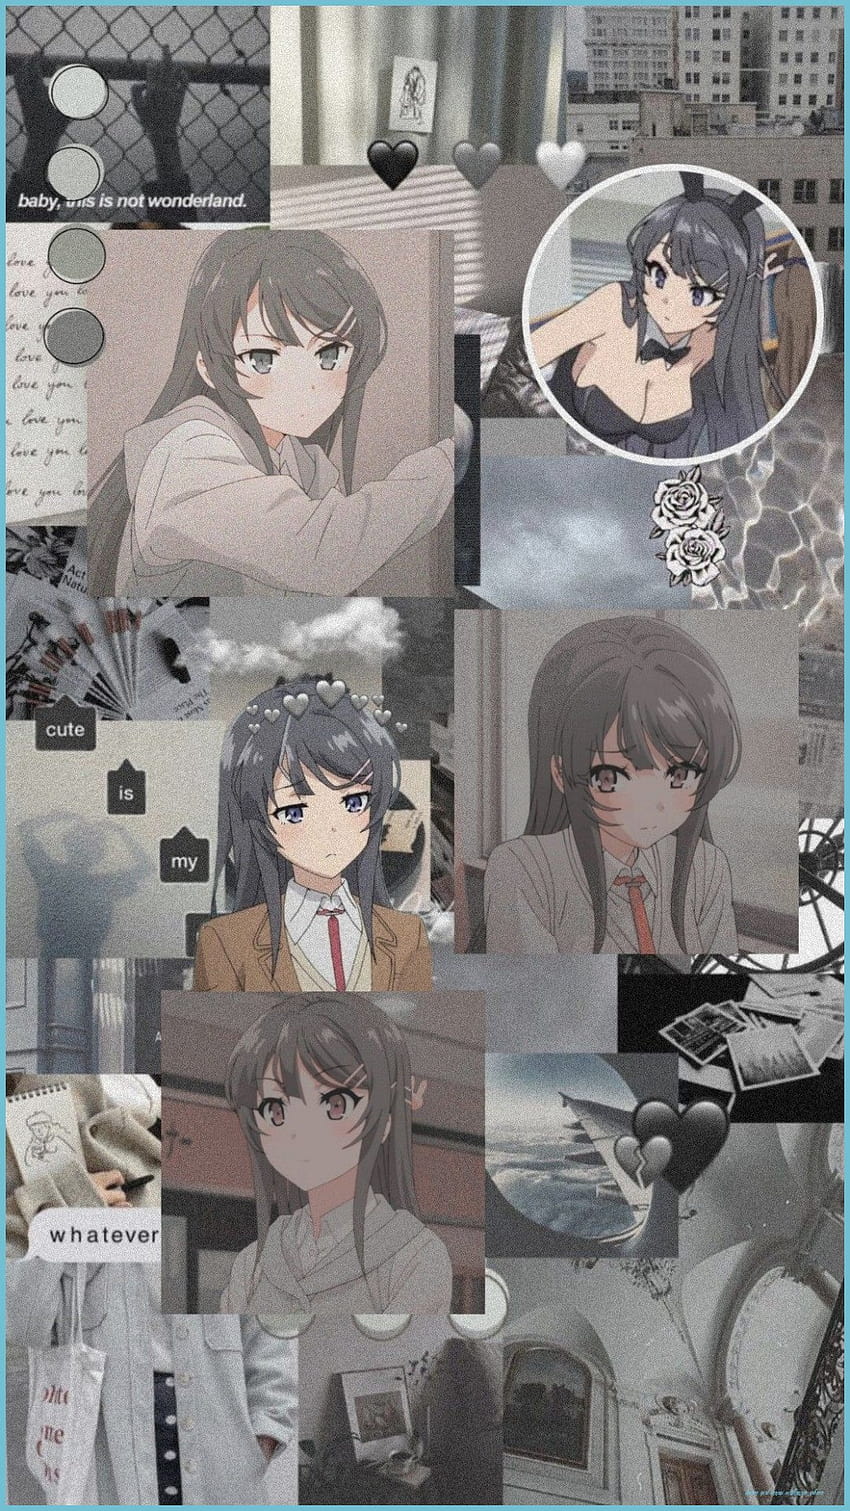 569875 1920x1080 Rascal Does Not Dream of Bunny Girl Senpai wallpaper PNG -  Rare Gallery HD Wallpapers